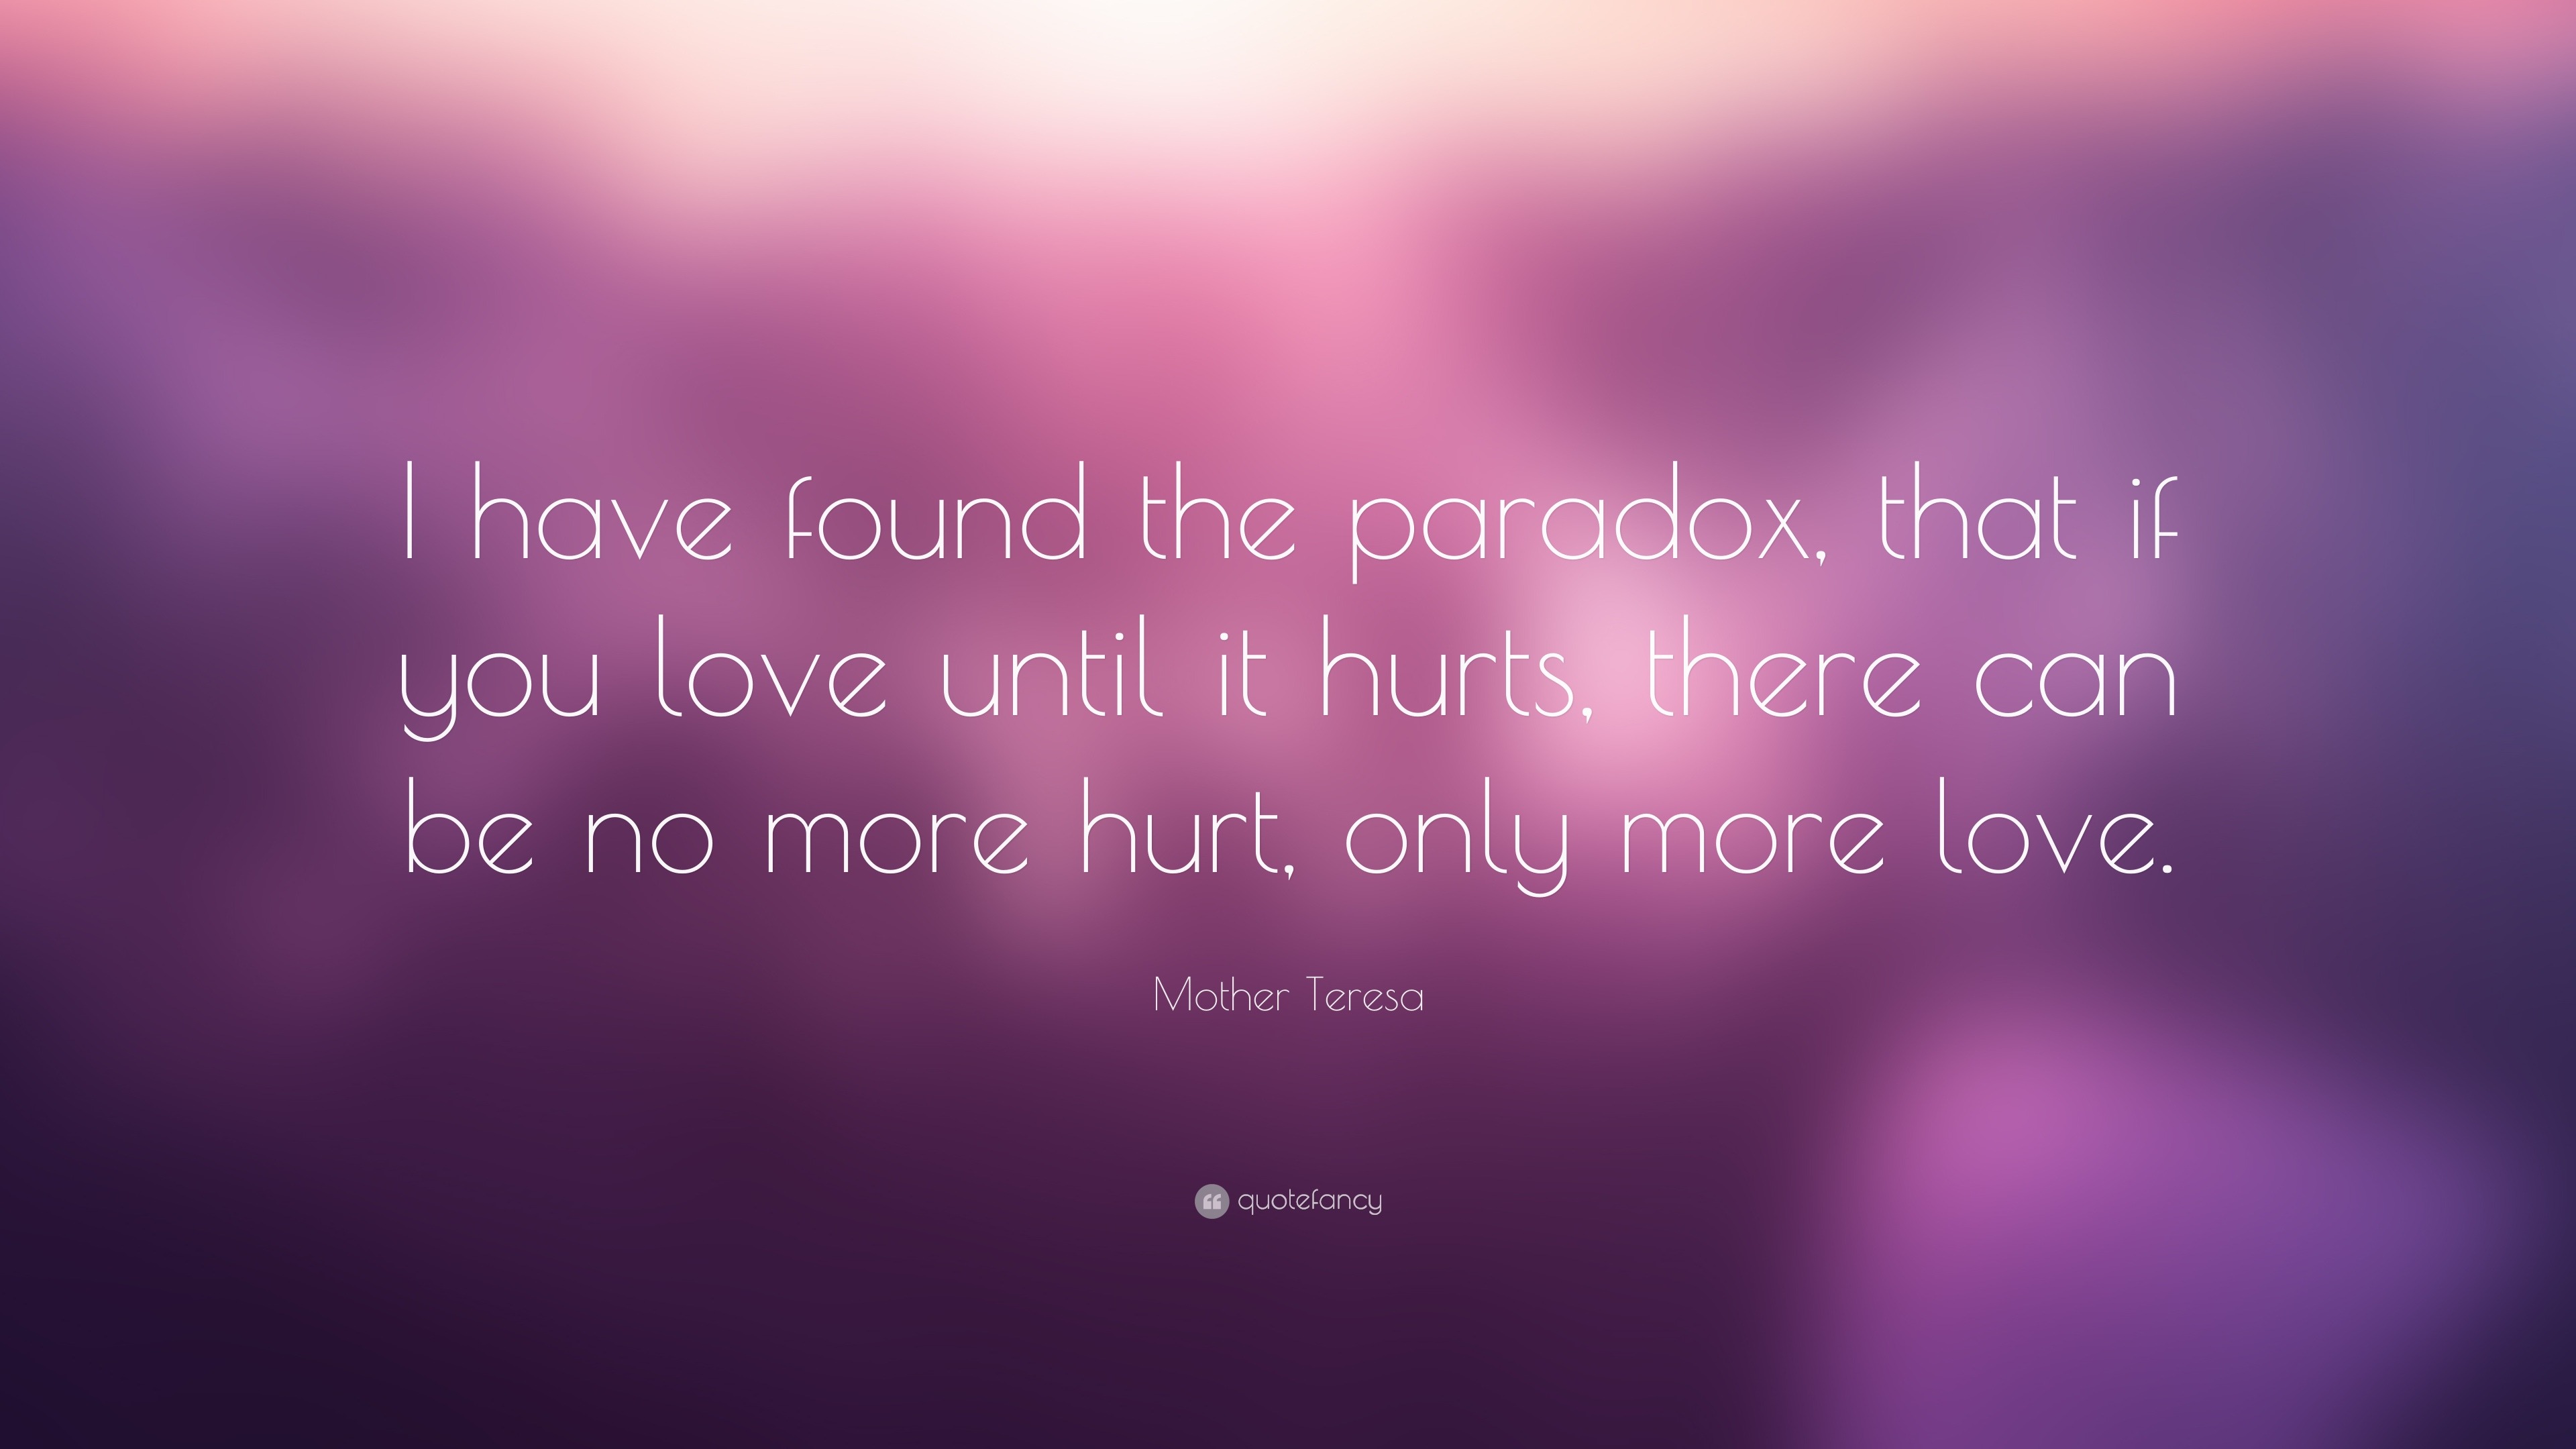 Mother Teresa Quote “I have found the paradox that if you love until